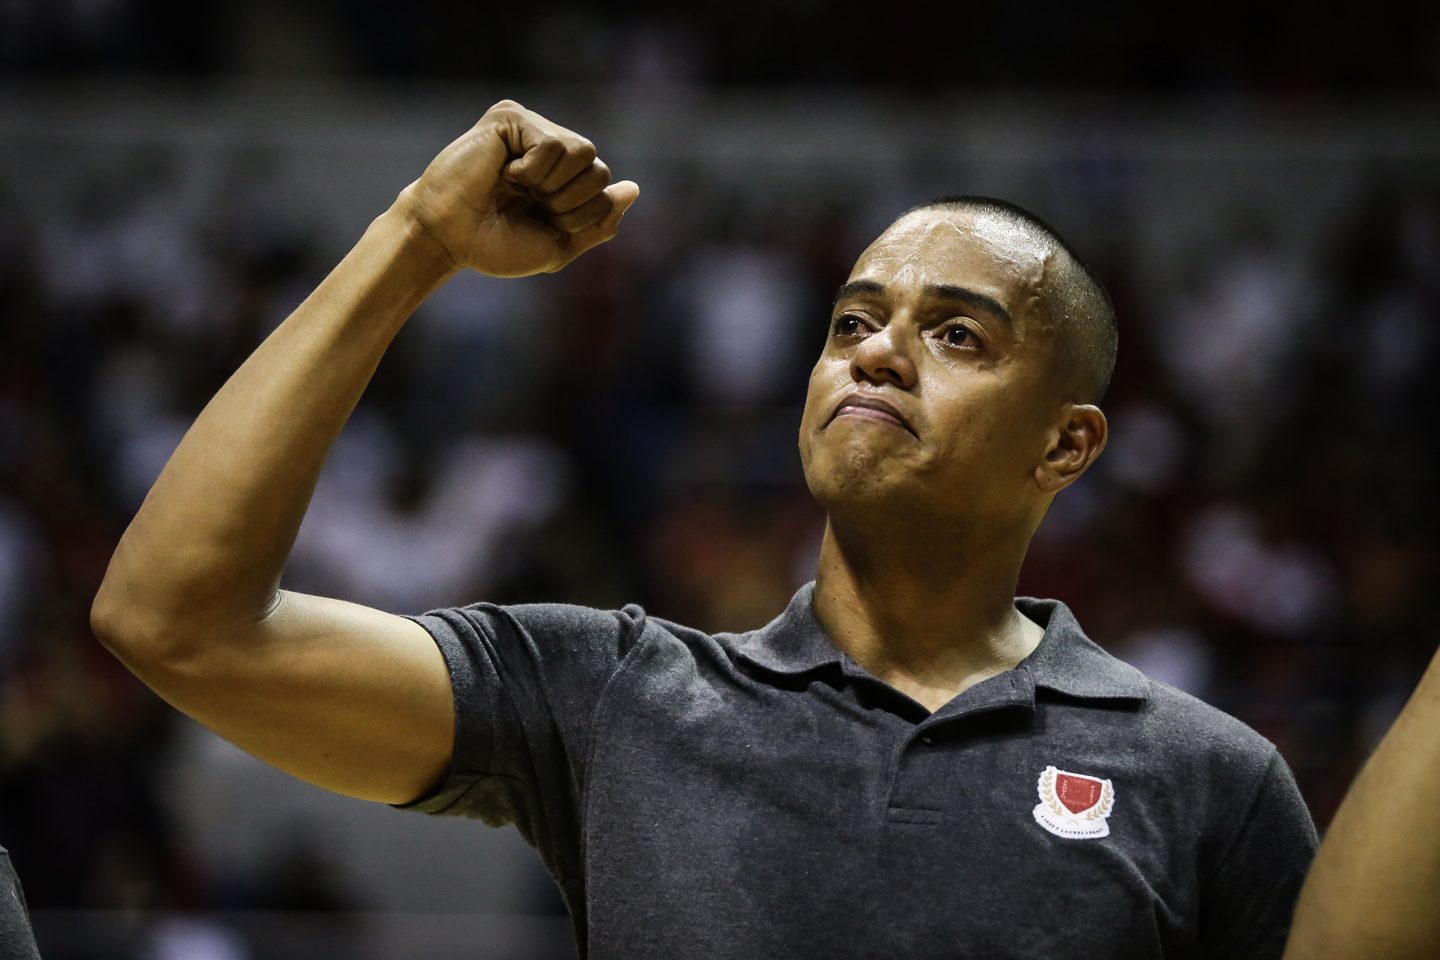 Finals loss to San Beda will only toughen Lyceum, says Topex Robinson